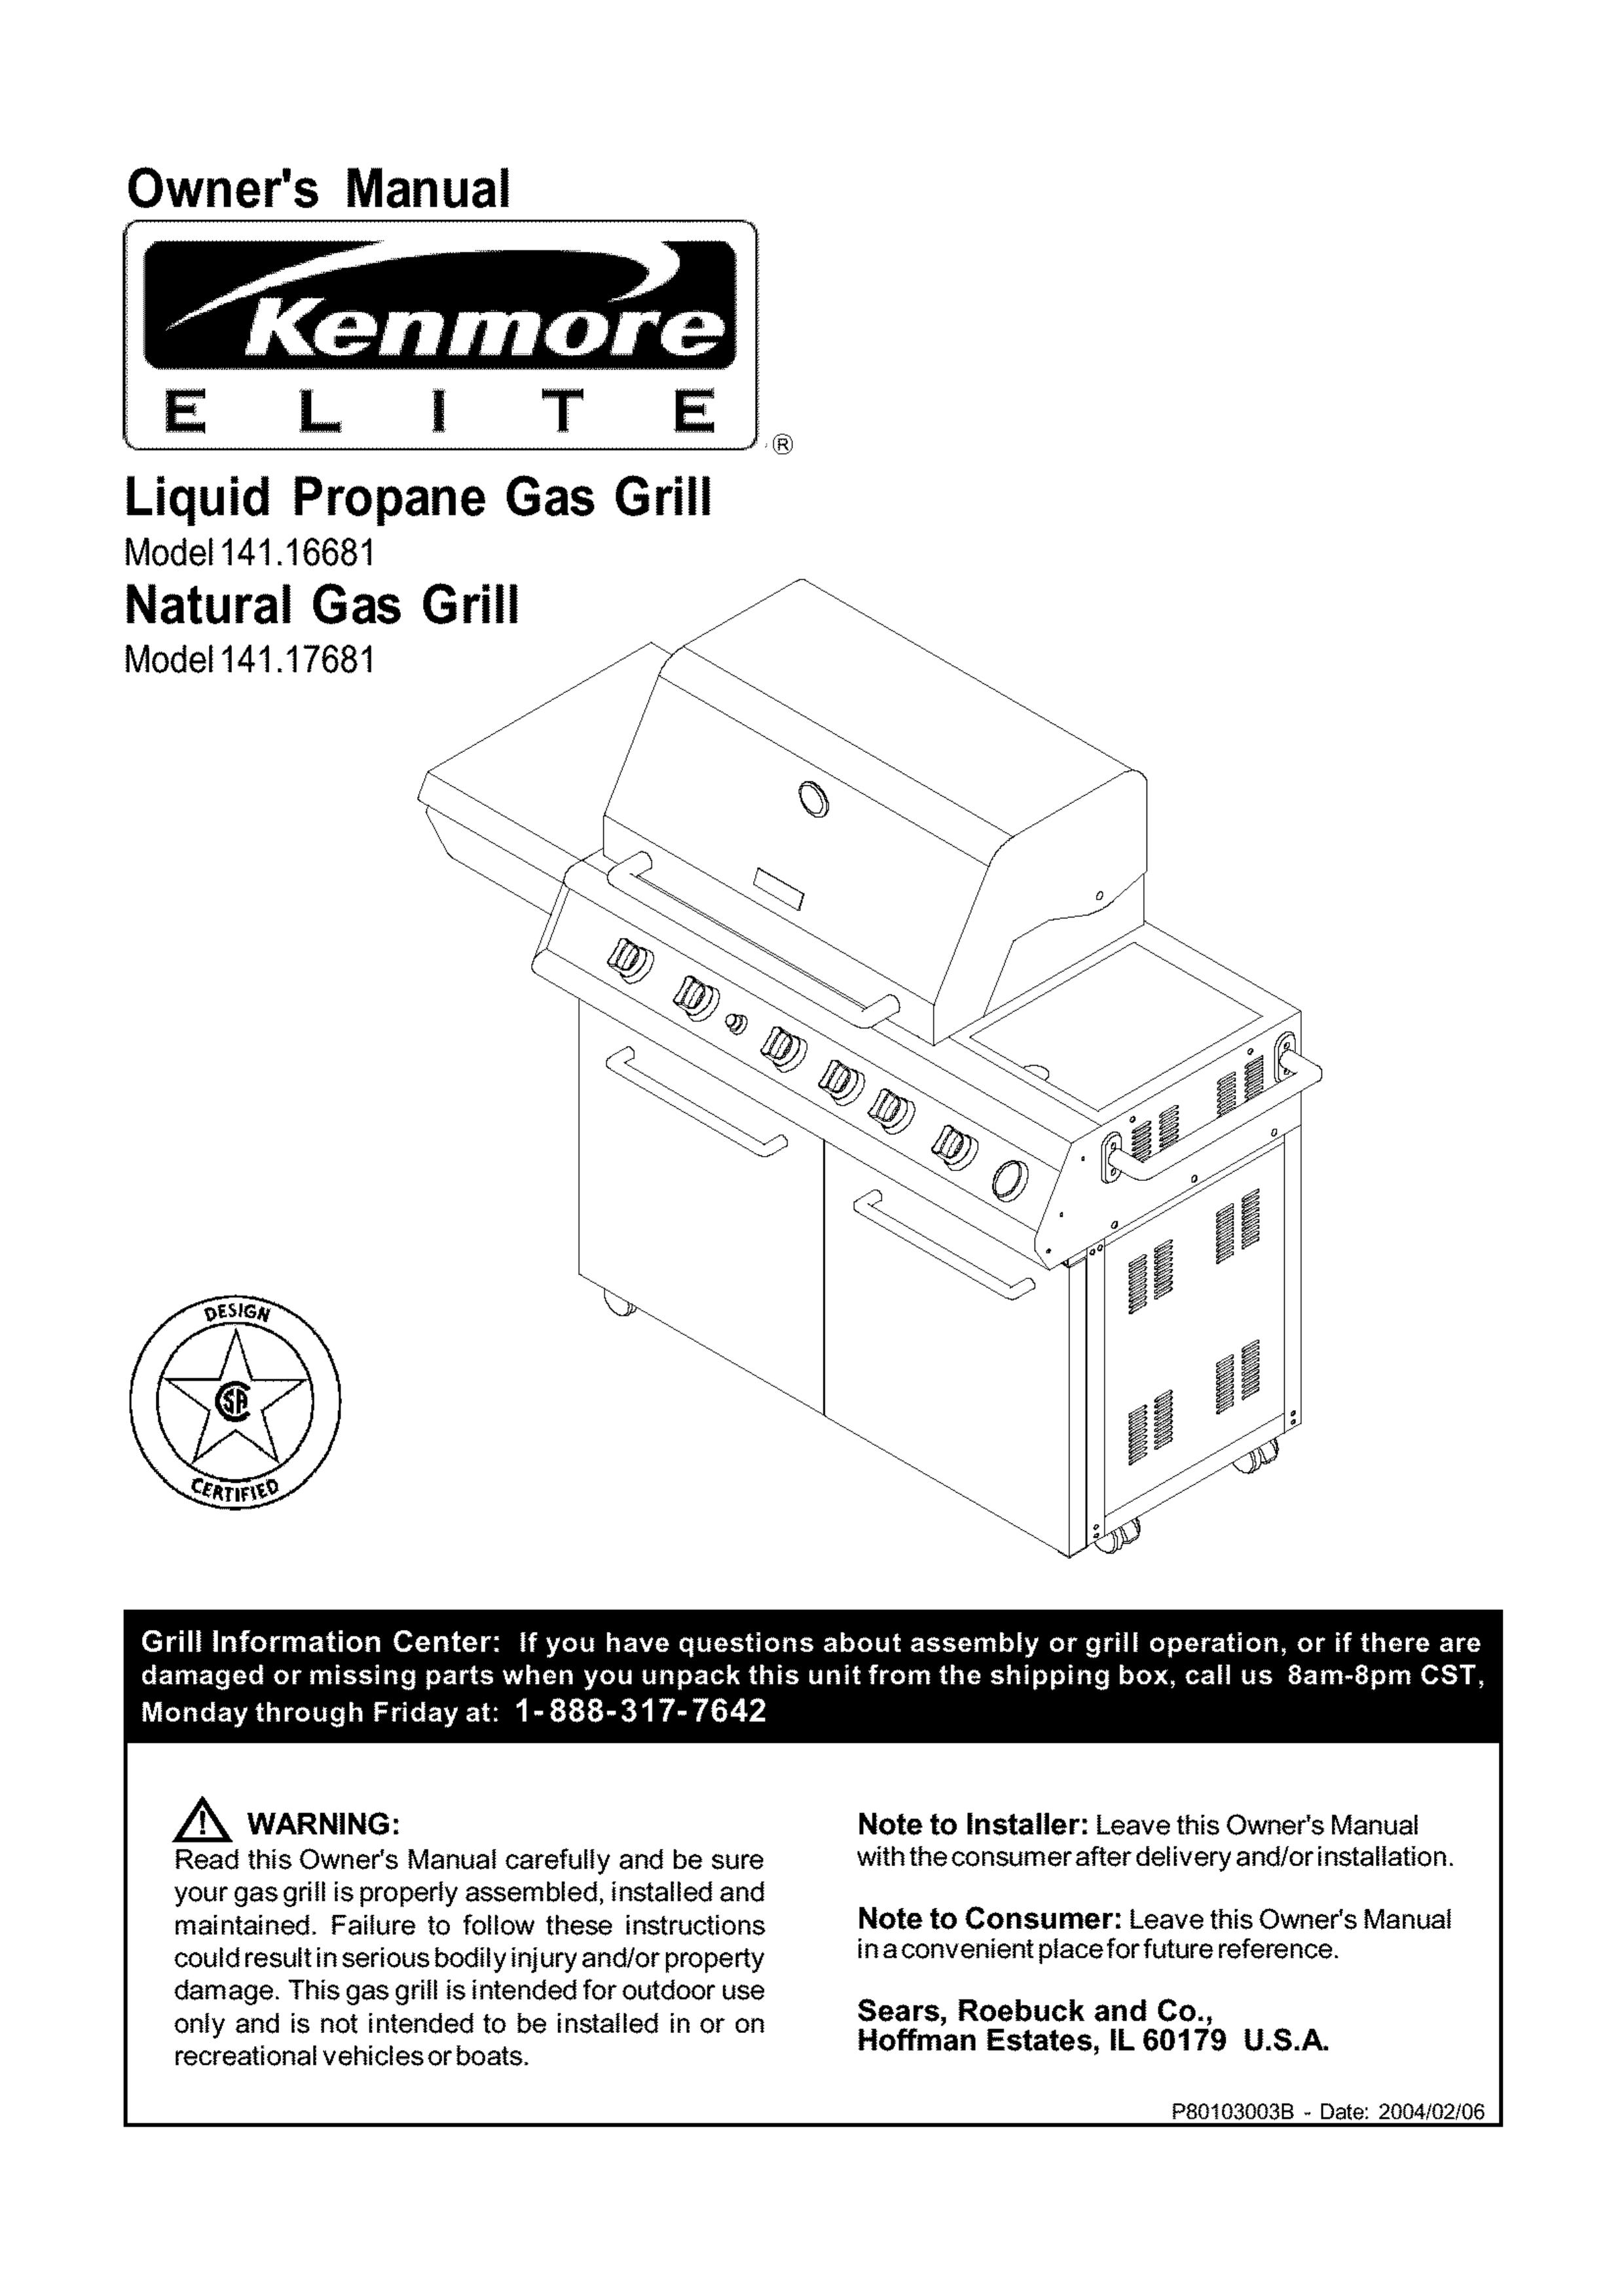 Kenmore 141.16681 Gas Grill User Manual